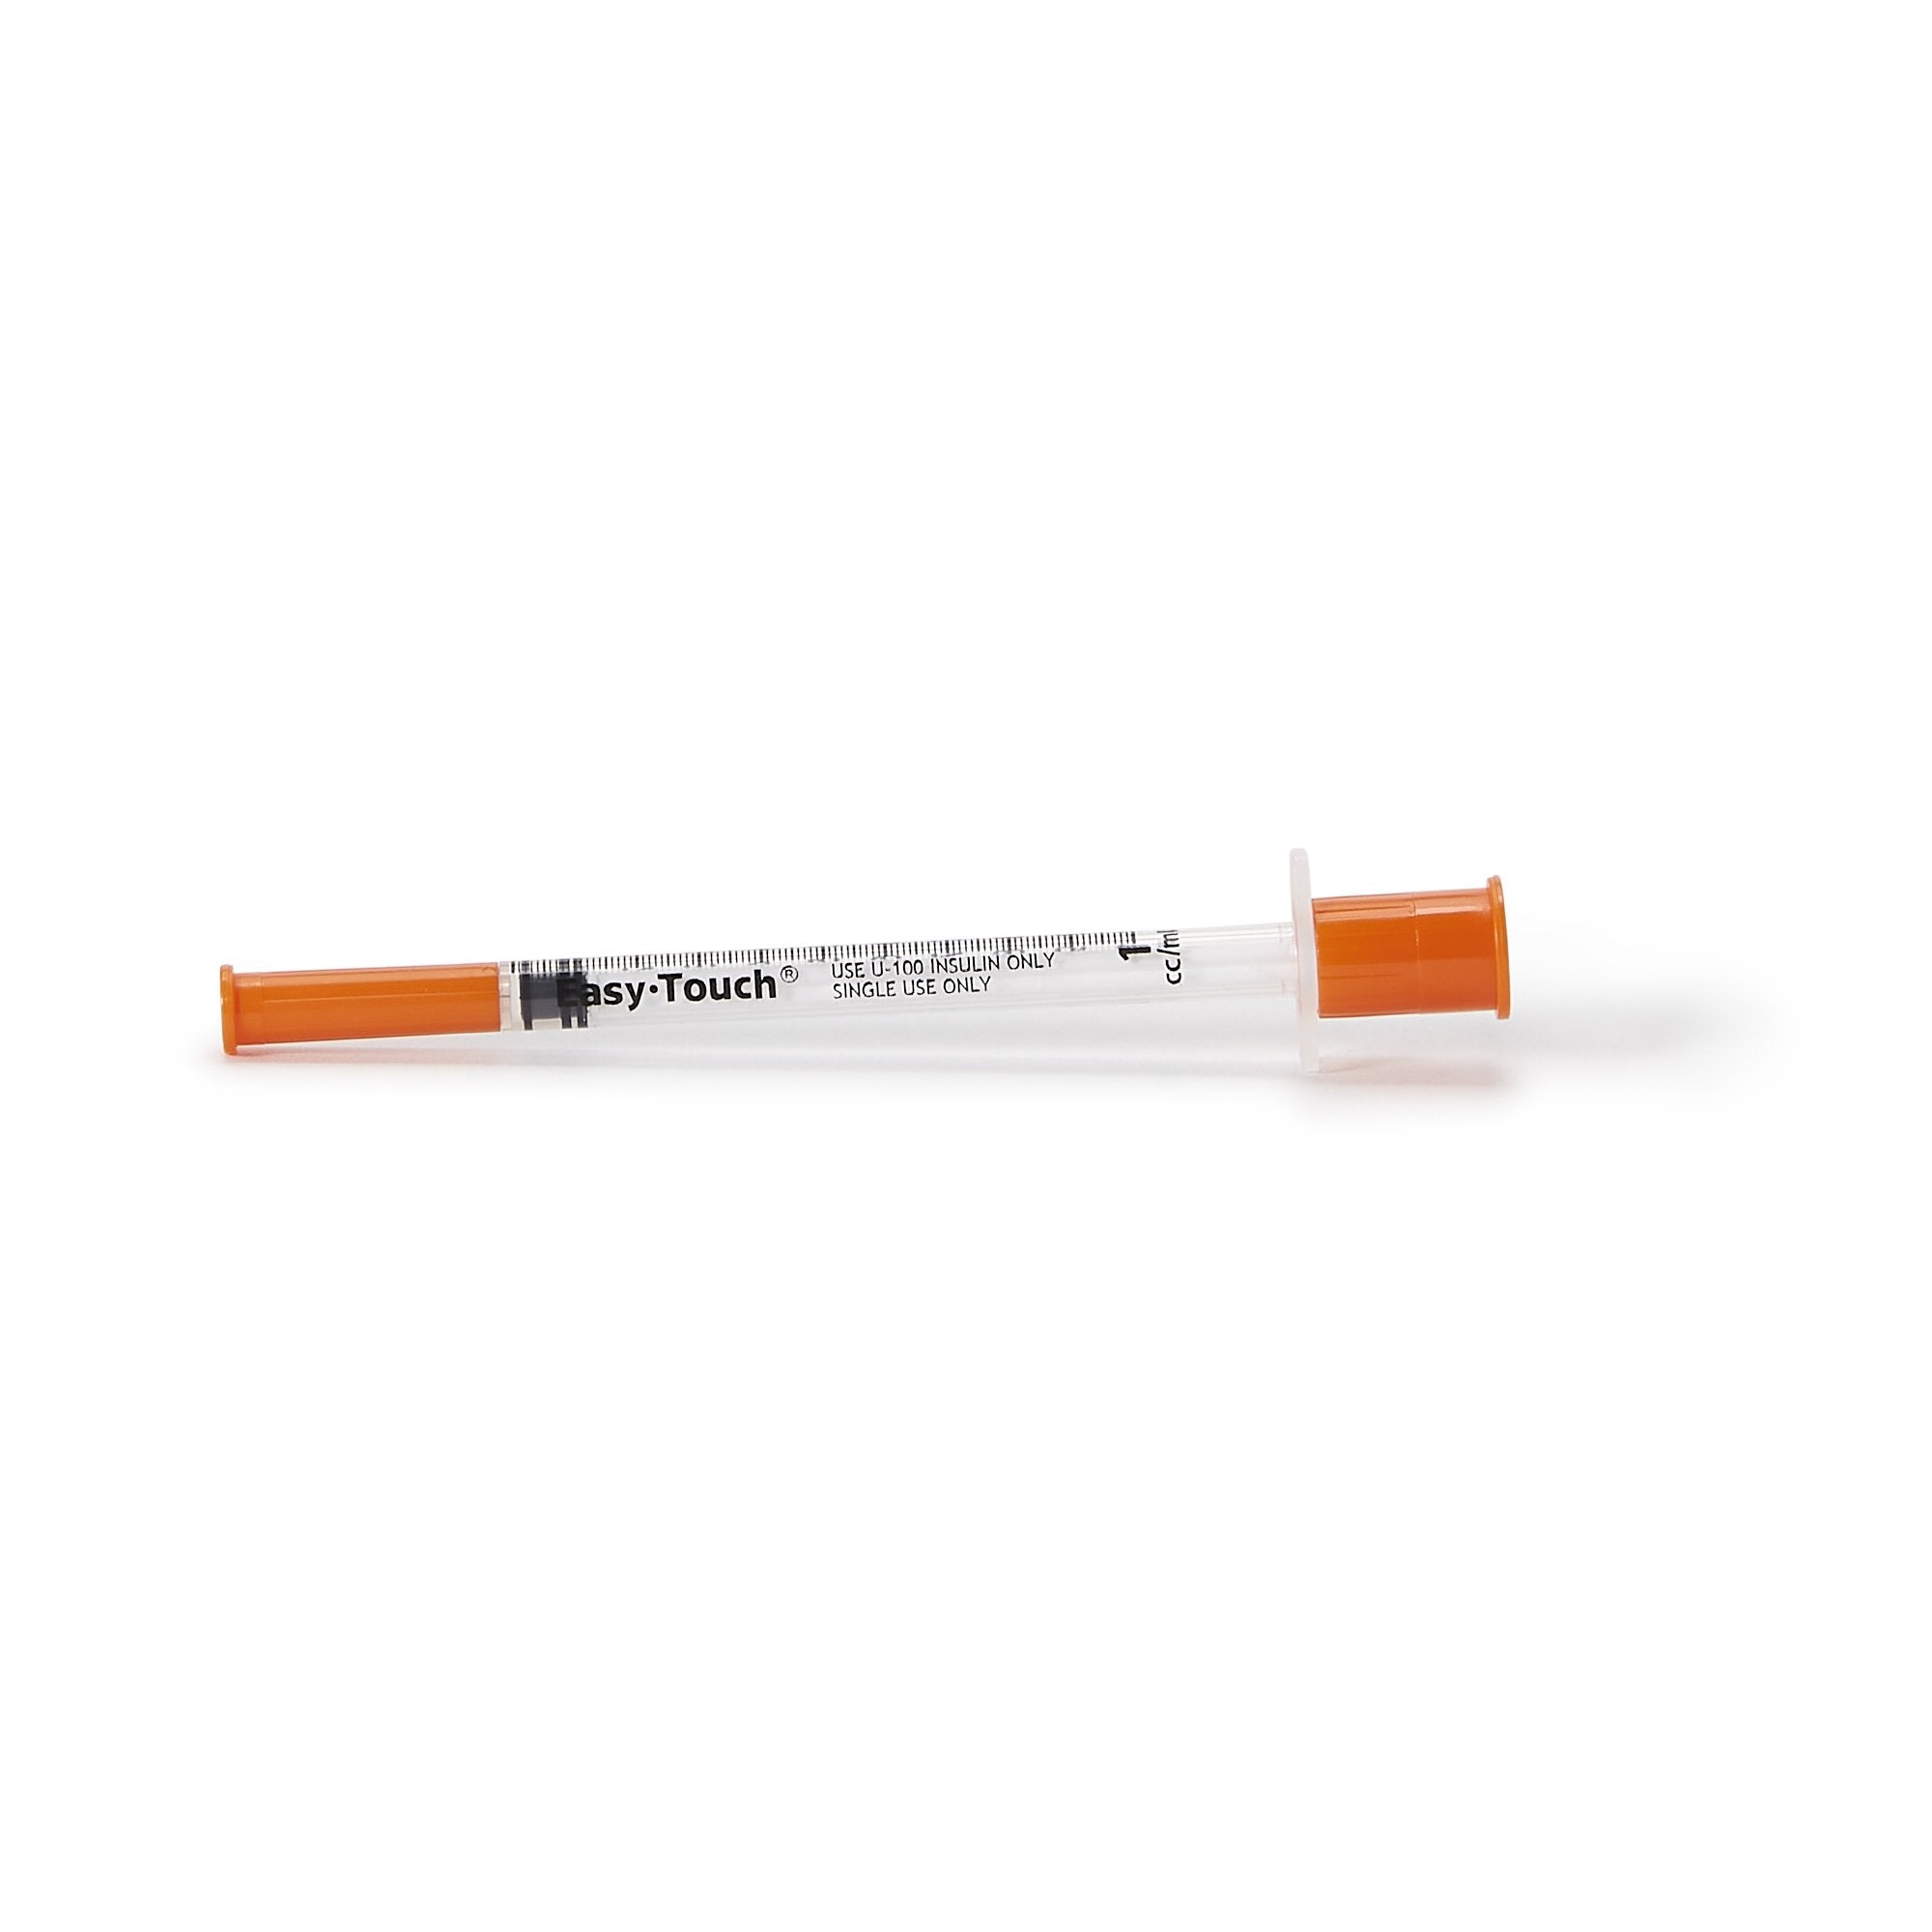 Standard Insulin Syringe with Needle EasyTouch 1 mL 5/16 Inch 30 Gauge NonSafety Thin Wall